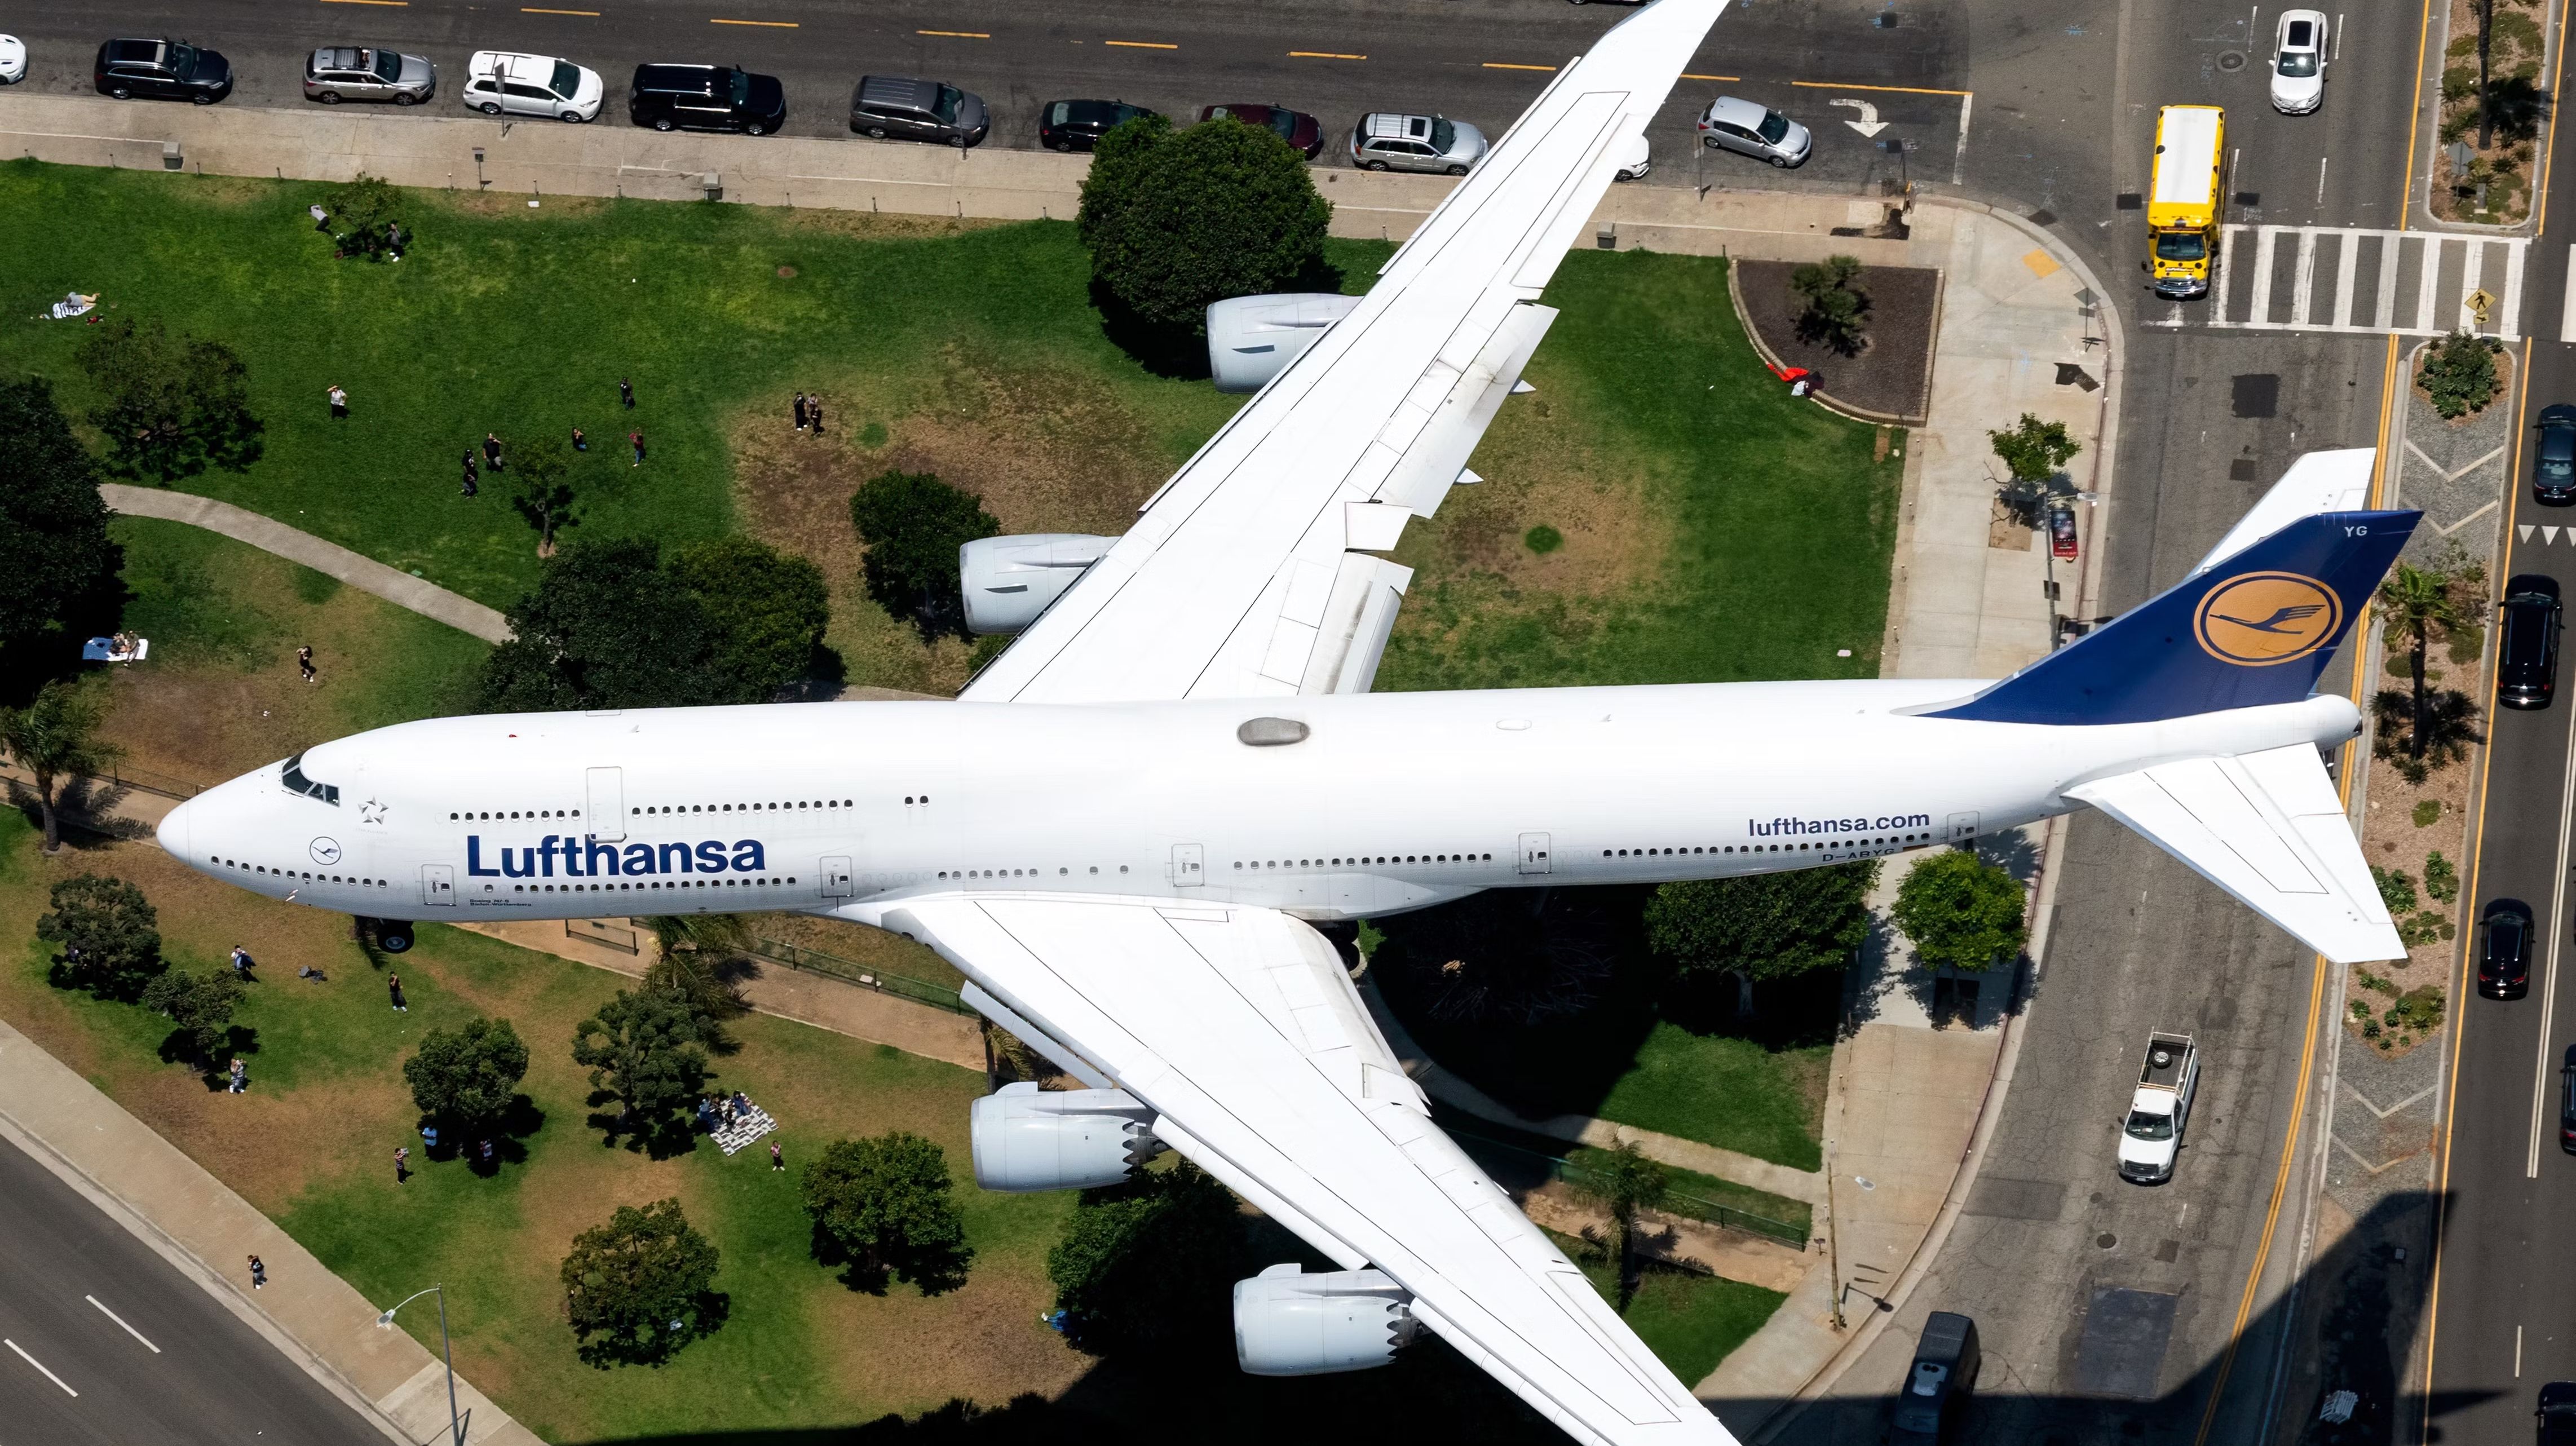 7 Routes: Where Lufthansa Will Fly The Boeing 747-400 This Summer